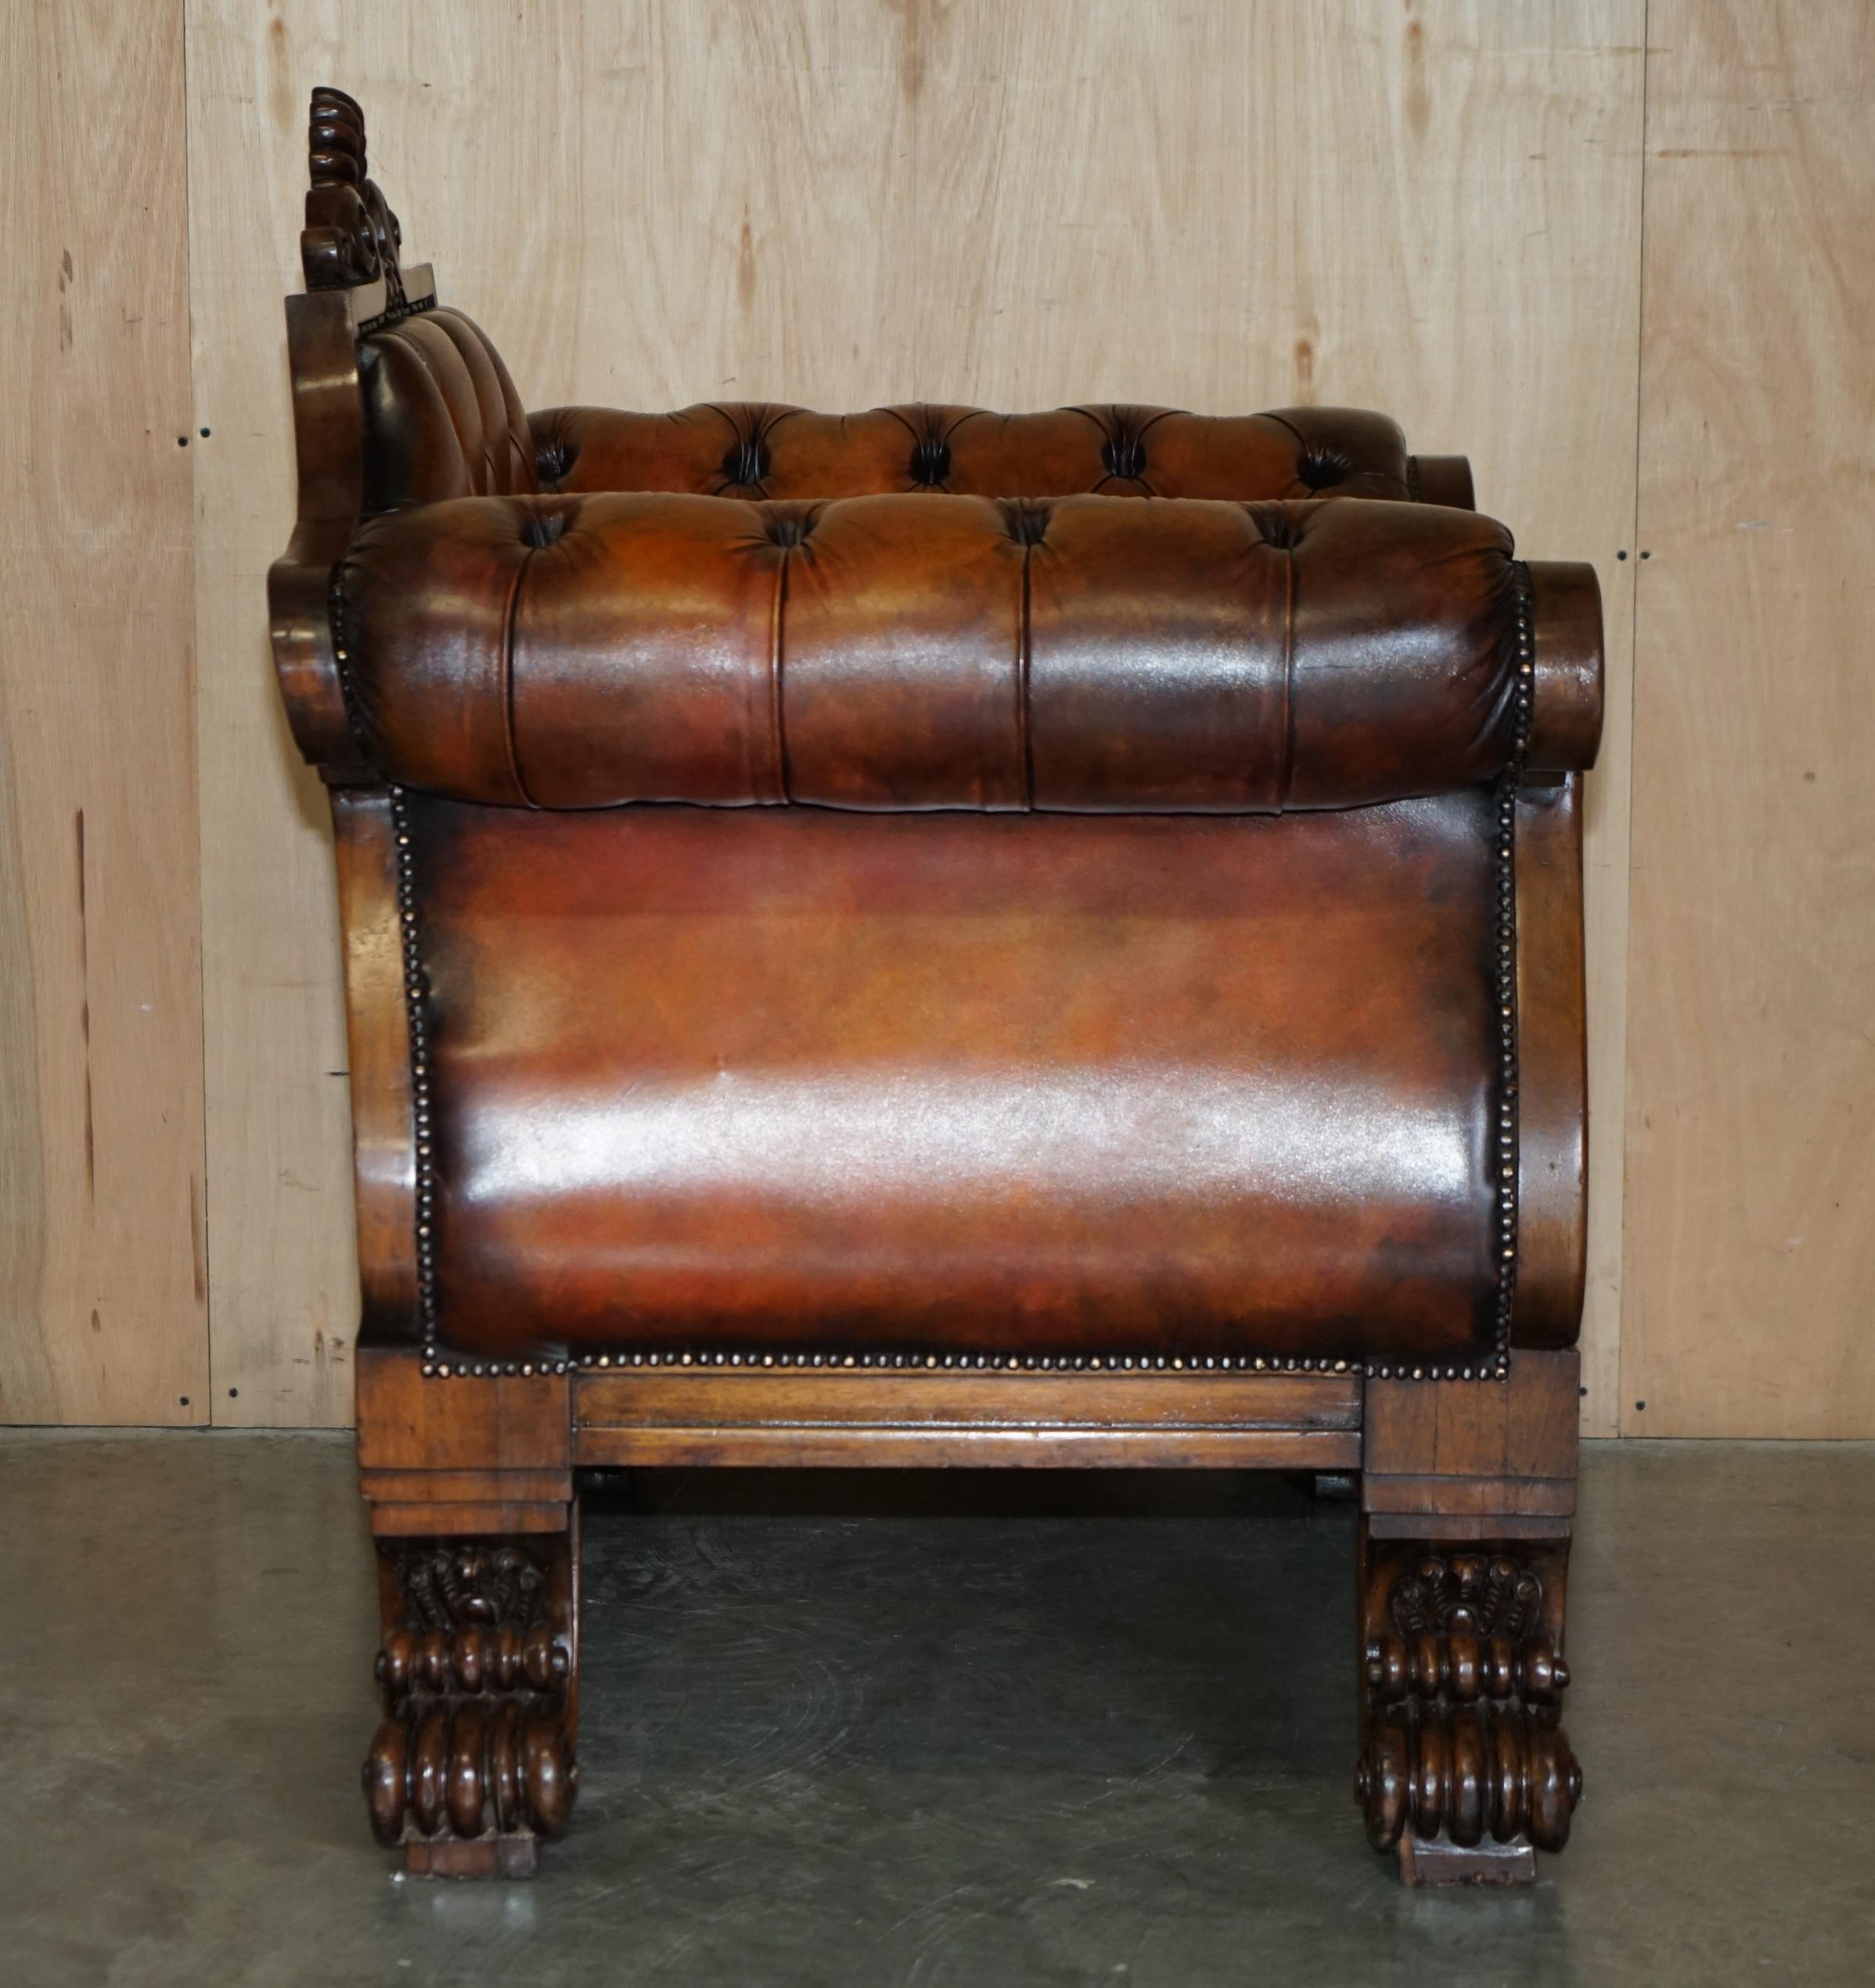 HUGE ORNATELY CARved ANTiQUE FULLY RESTORED CHESTERFIELD KING / QUEENS ARMCHAIR im Angebot 9